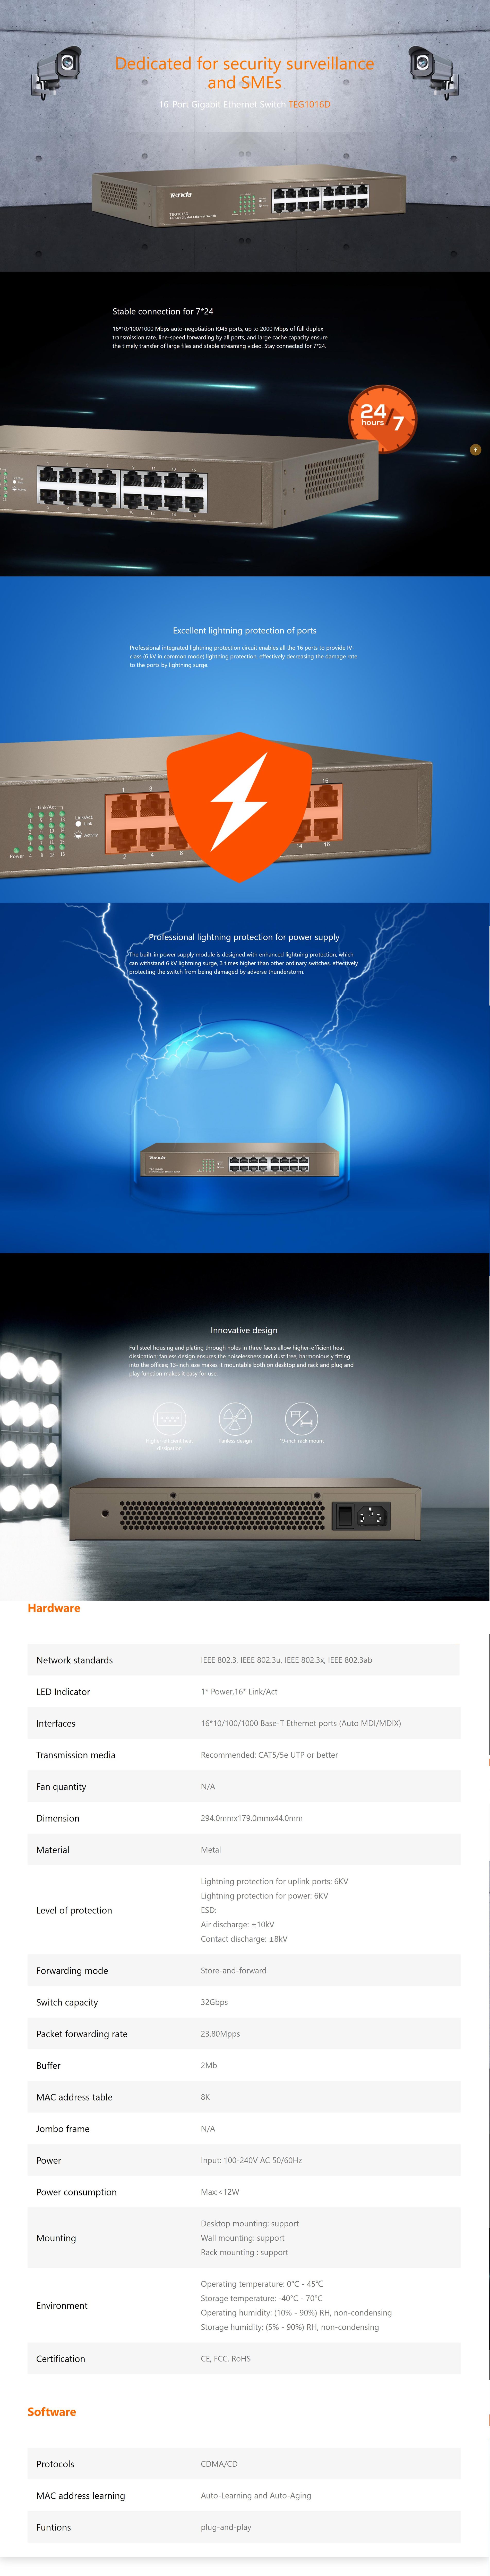 A large marketing image providing additional information about the product Tenda TEG1016D 16-Port Gigabit Ethernet Switch - Additional alt info not provided